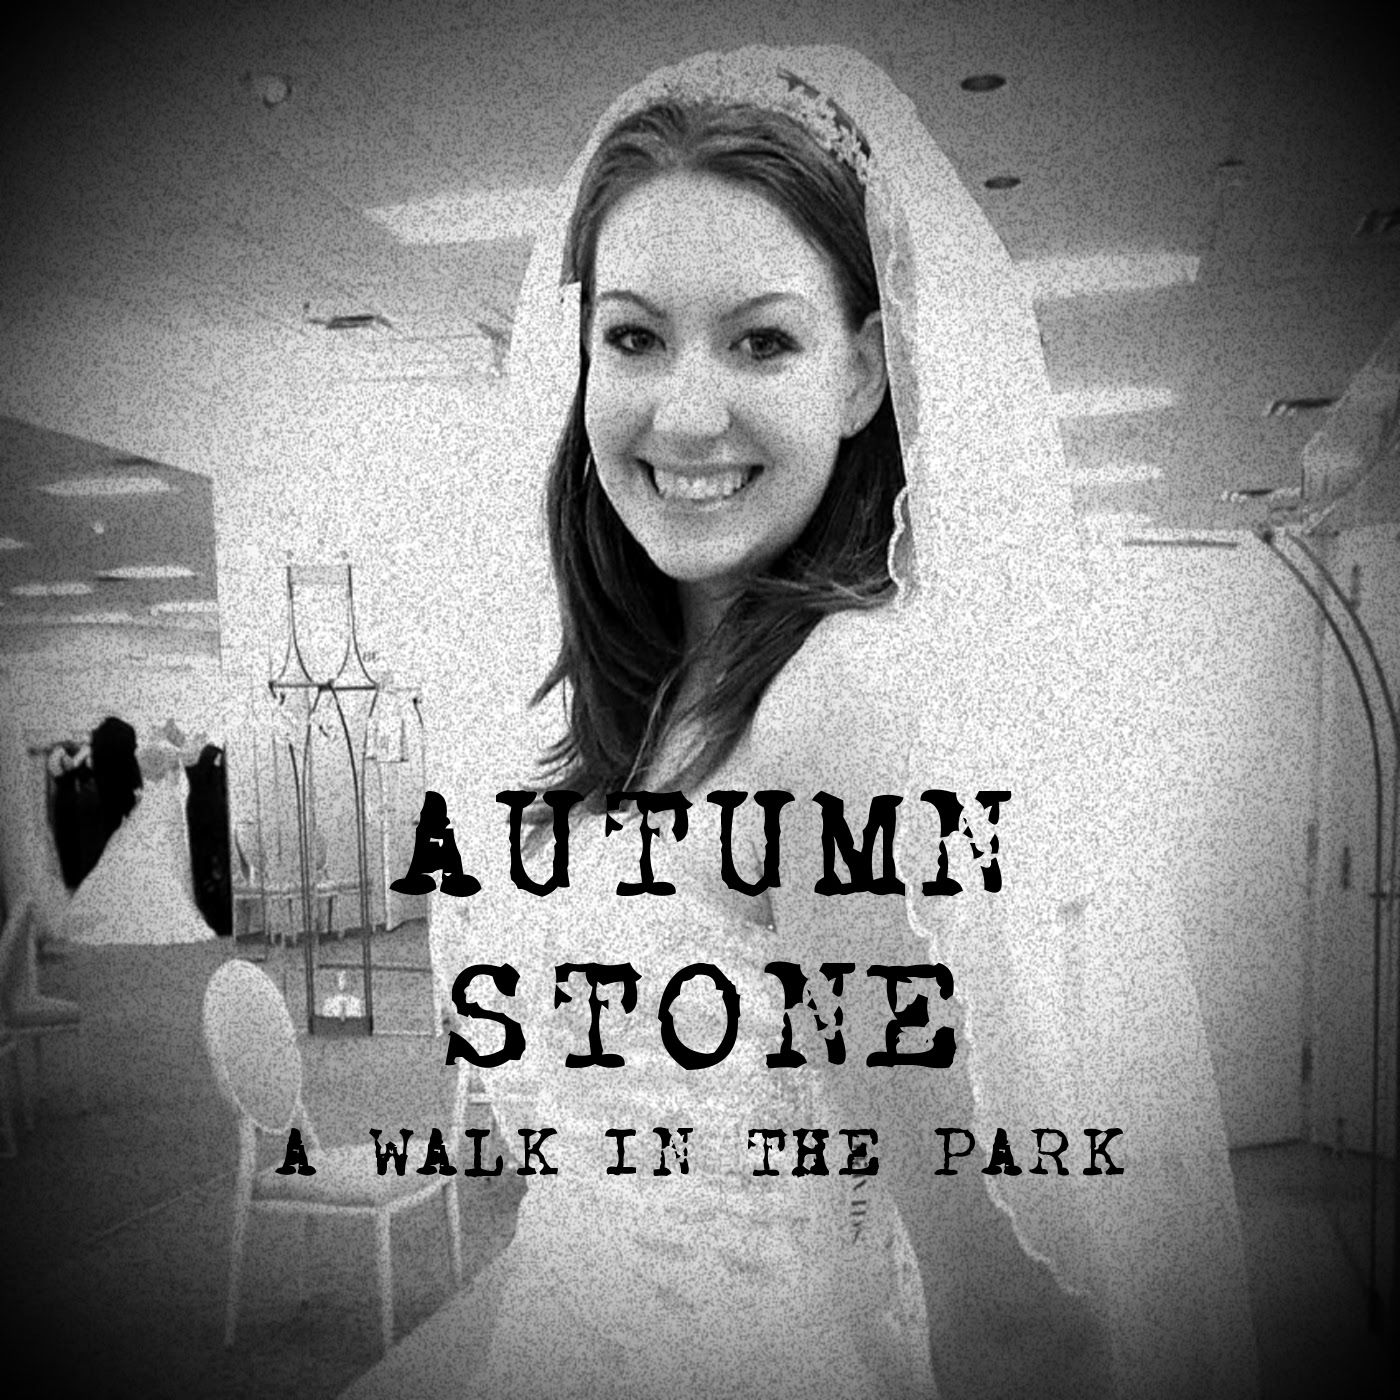 Autumn Stone - A Walk in the Park by When Suicide is Murder